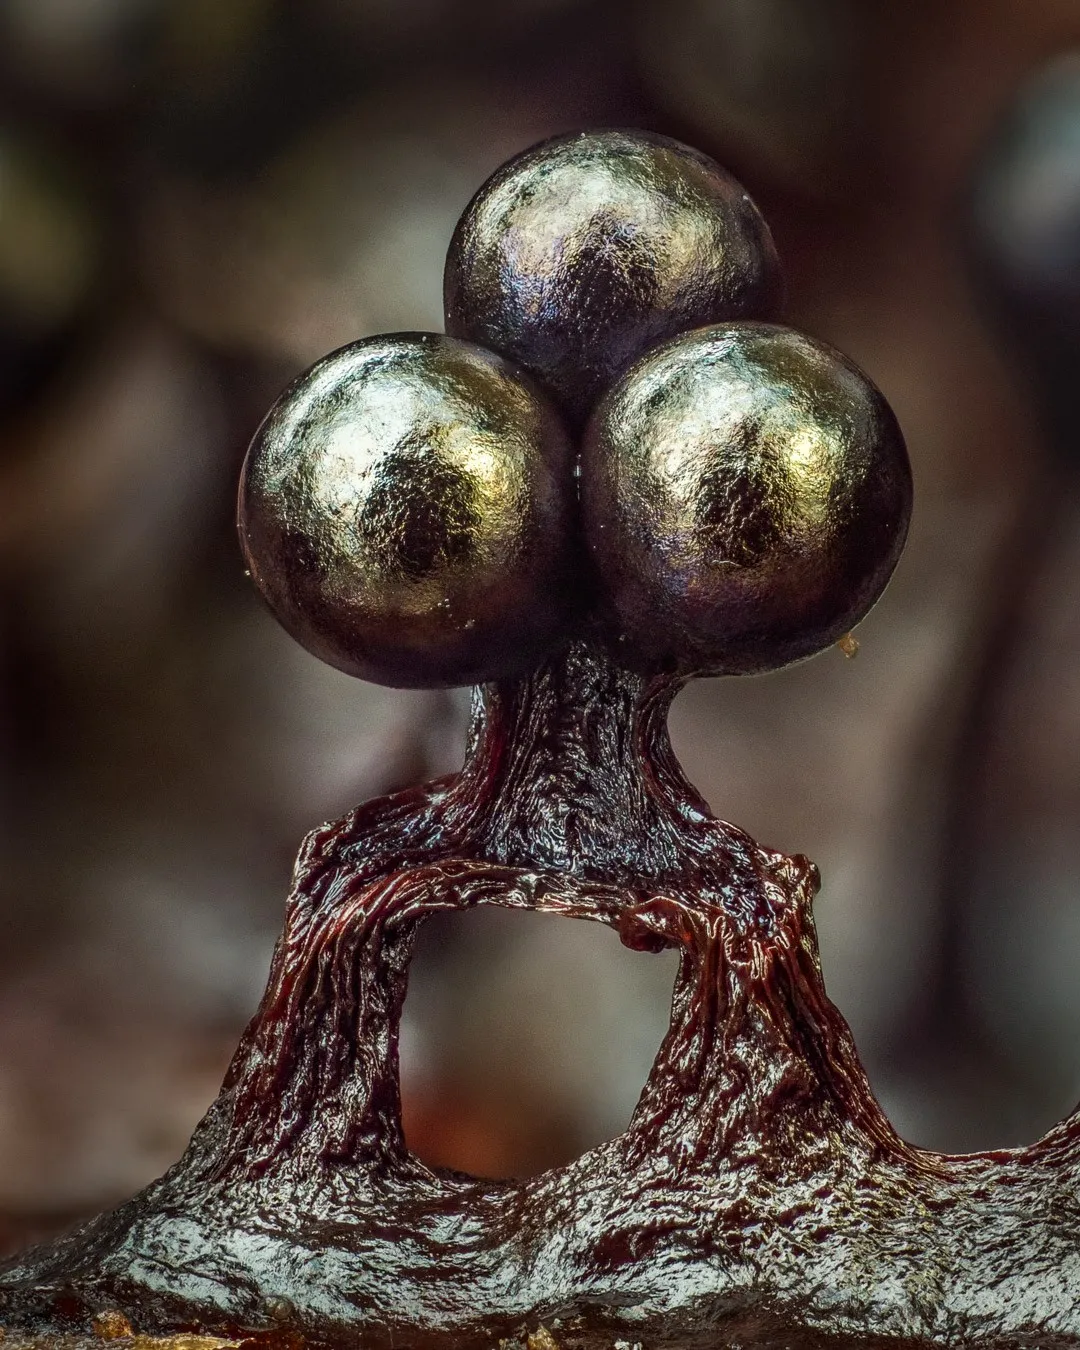 The Lush Macro Photography Of Slime Molds By Barry Webb 8